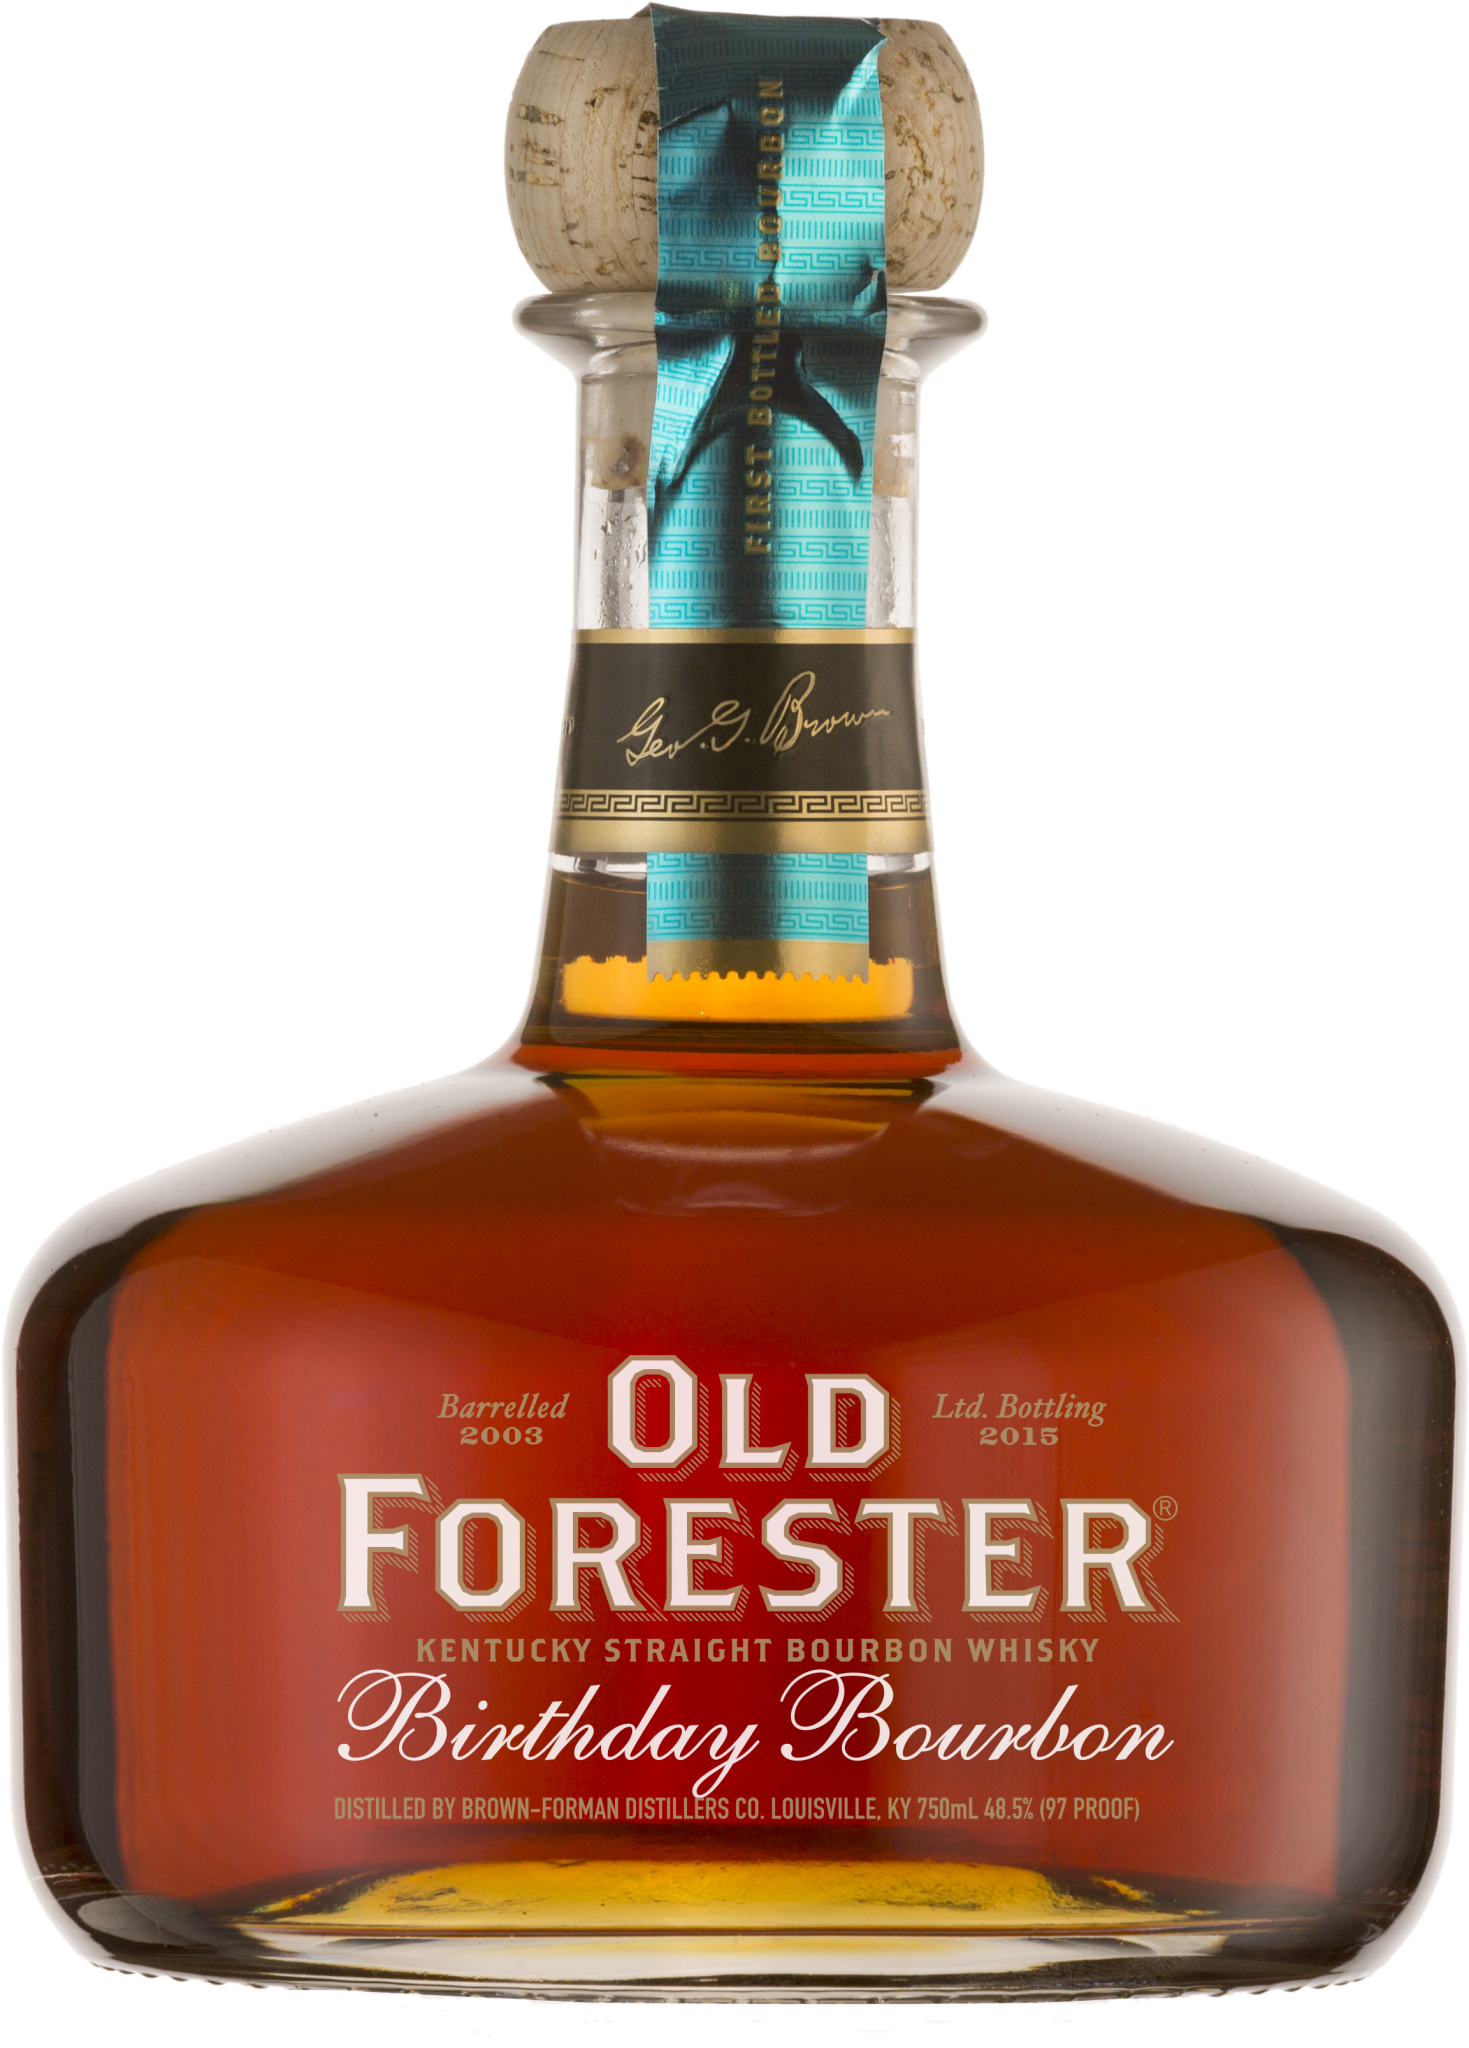 A bottle of Old Forester 2015 Birthday Bourbon on a black background.